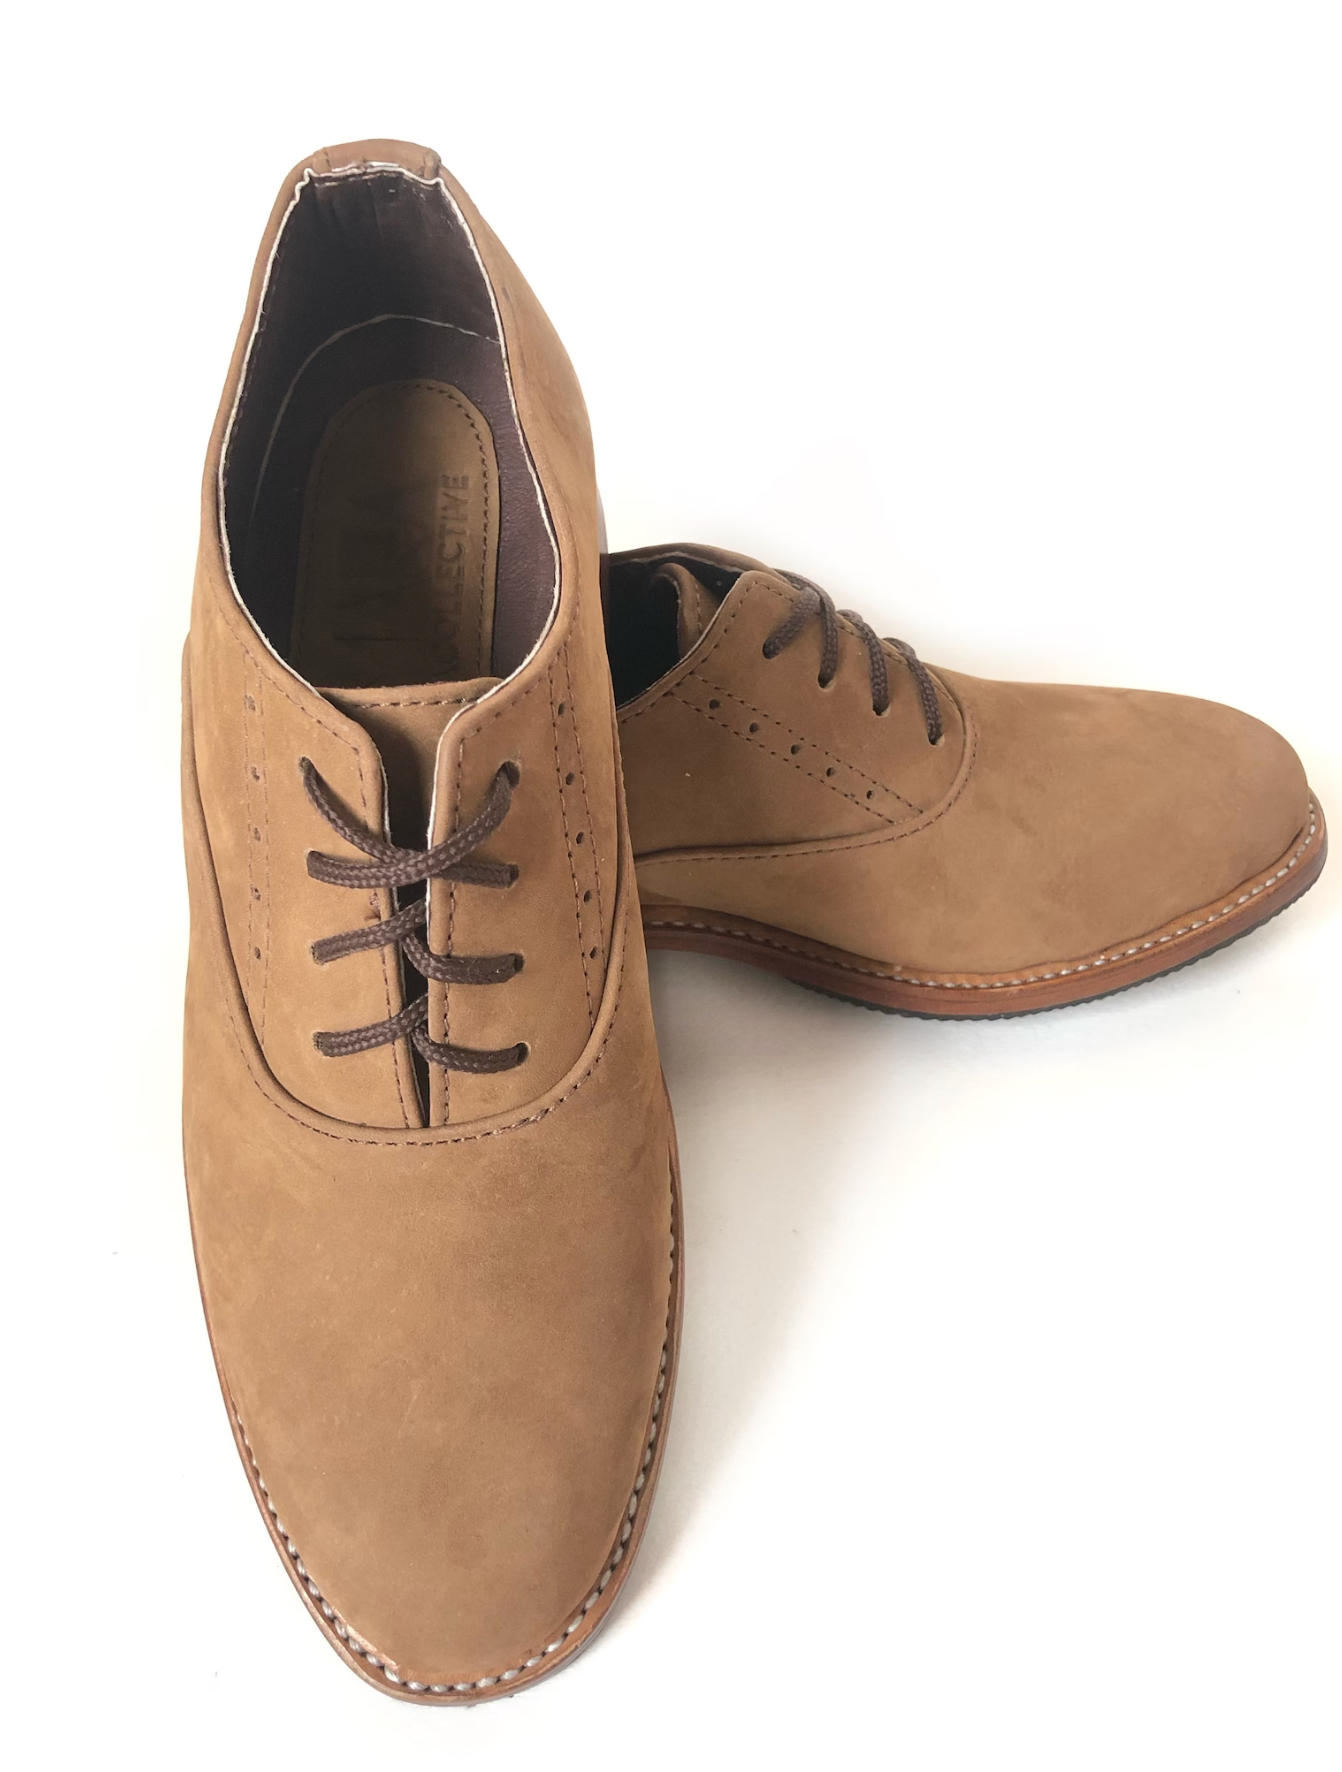 Leather Oxfords shoes